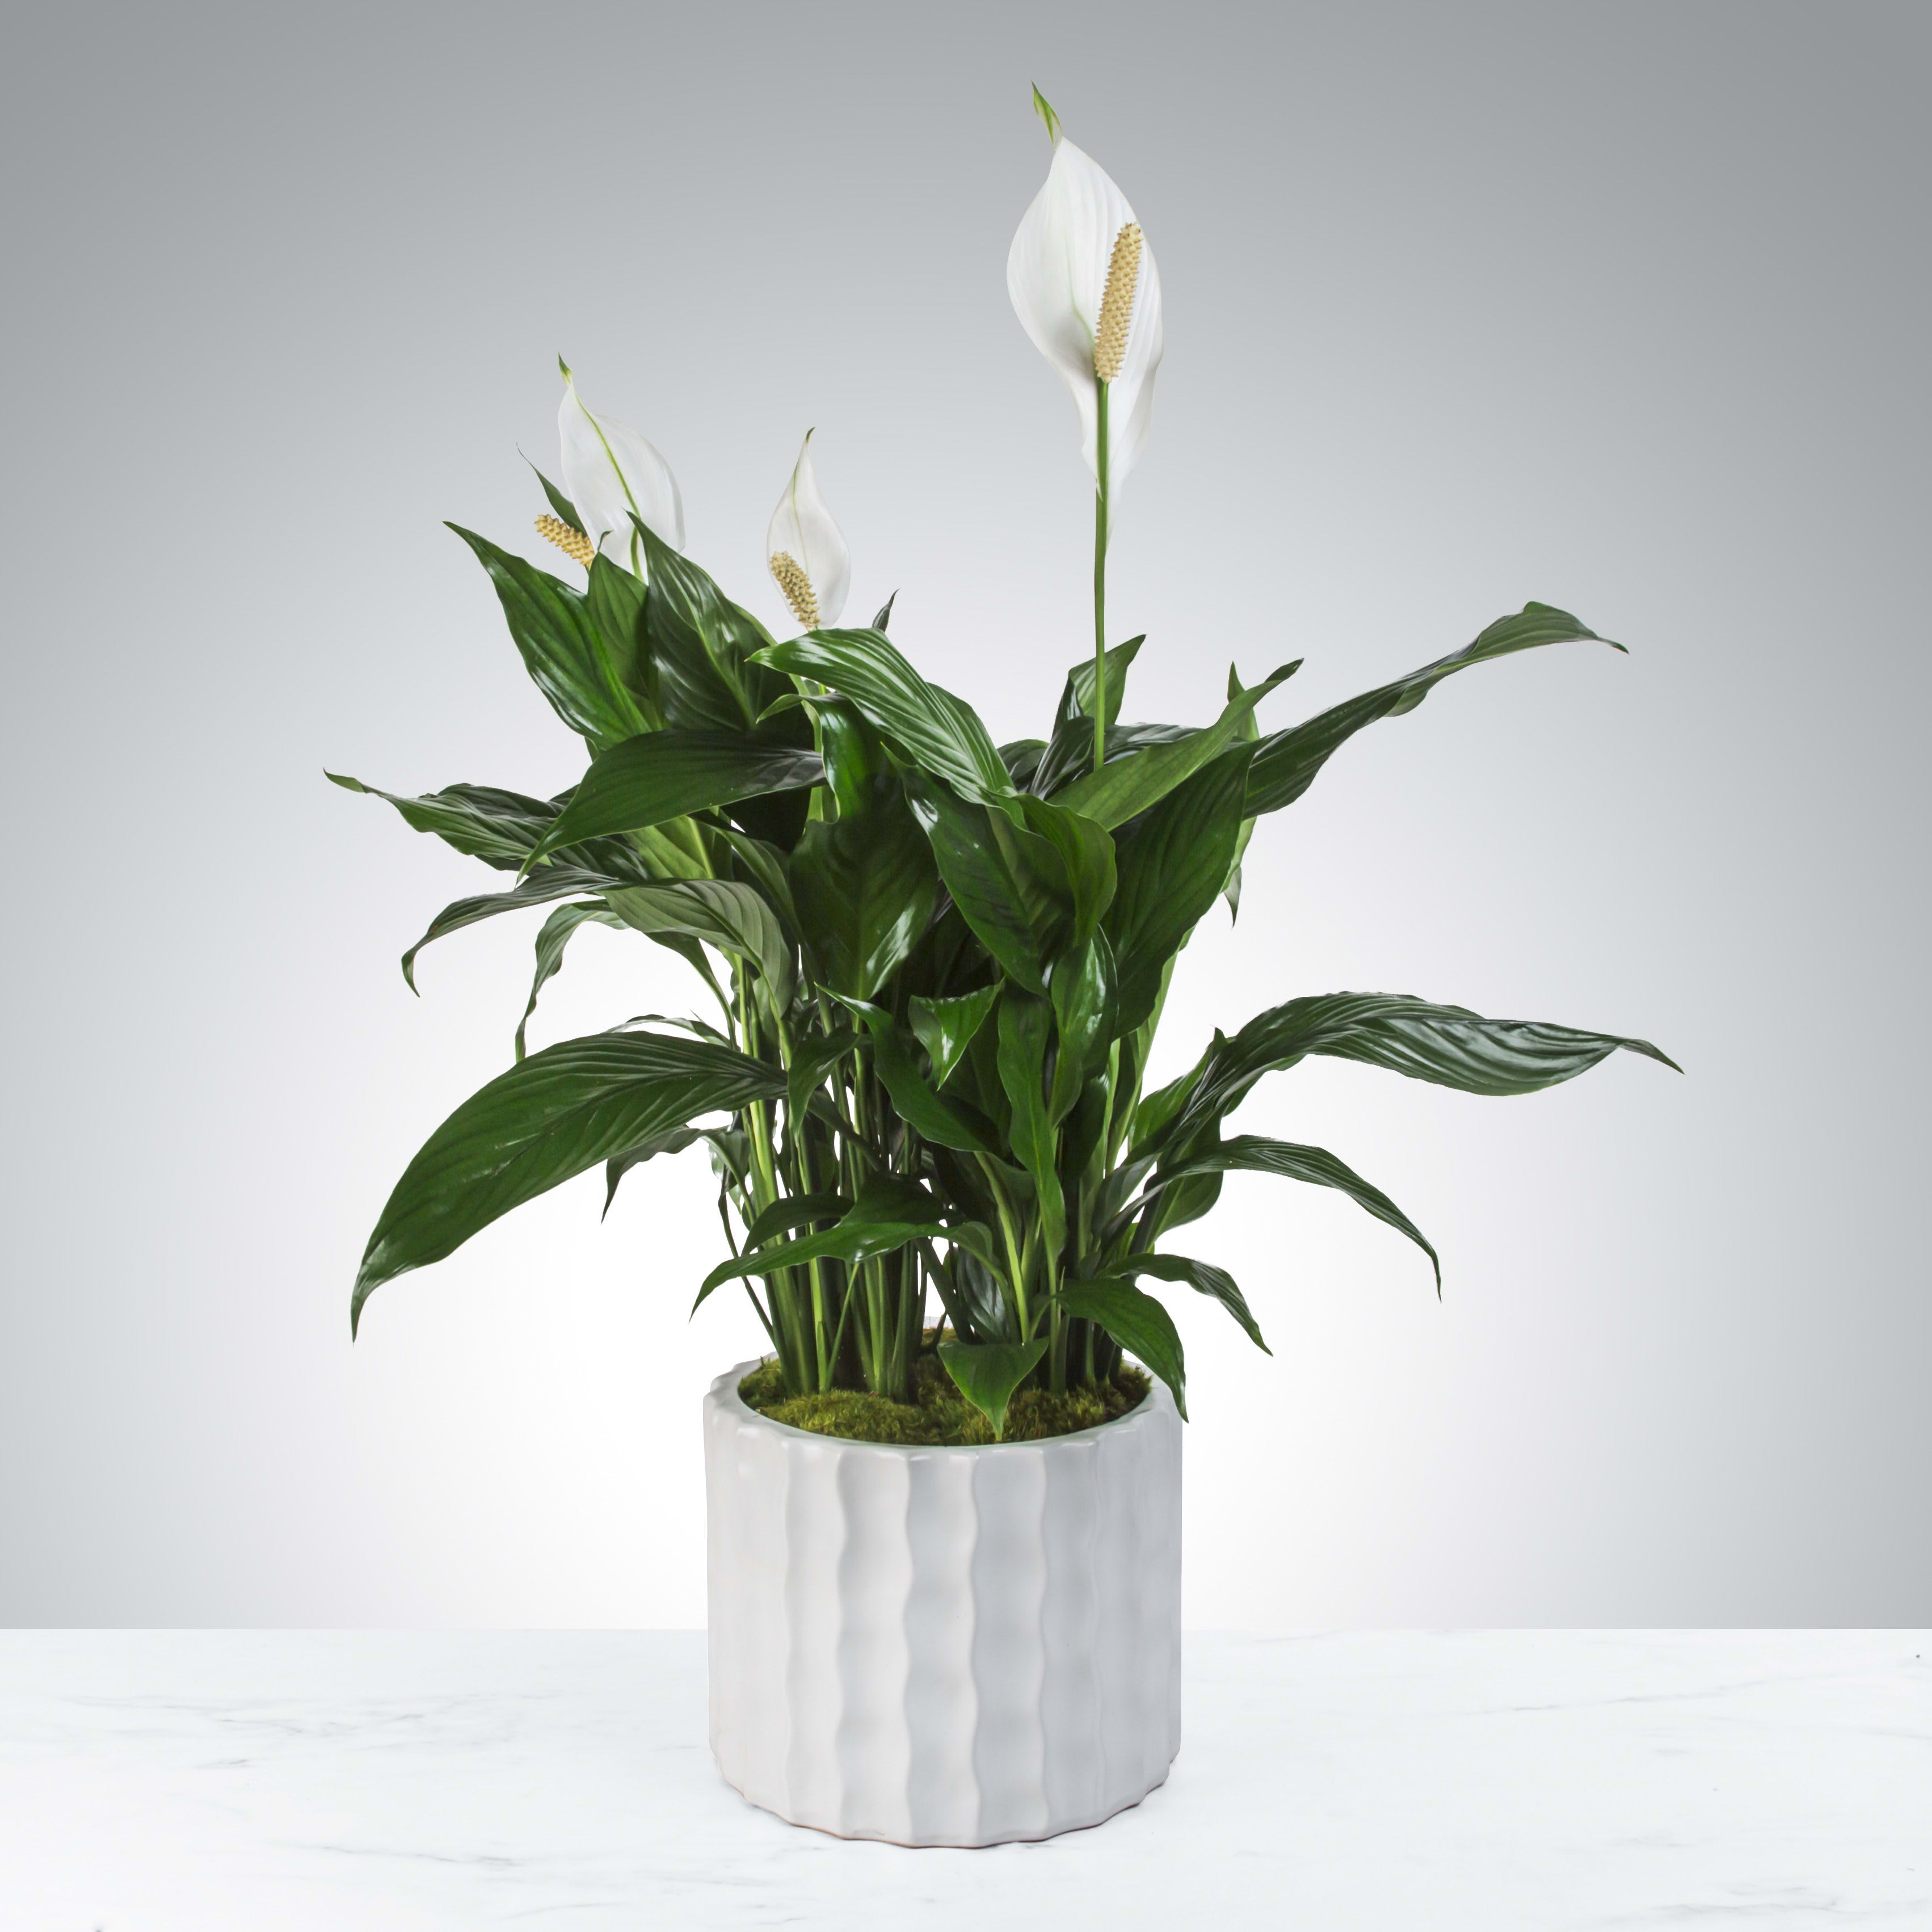 Modern Spathiphyllum Plant by BloomNation™ - A tall reaching spathiphyllum plant, also known as a peace lily, set in a modern planter. Peace Lily's are easy to grow and are known for their air toxin removing properties. Send the gift of greenery! 